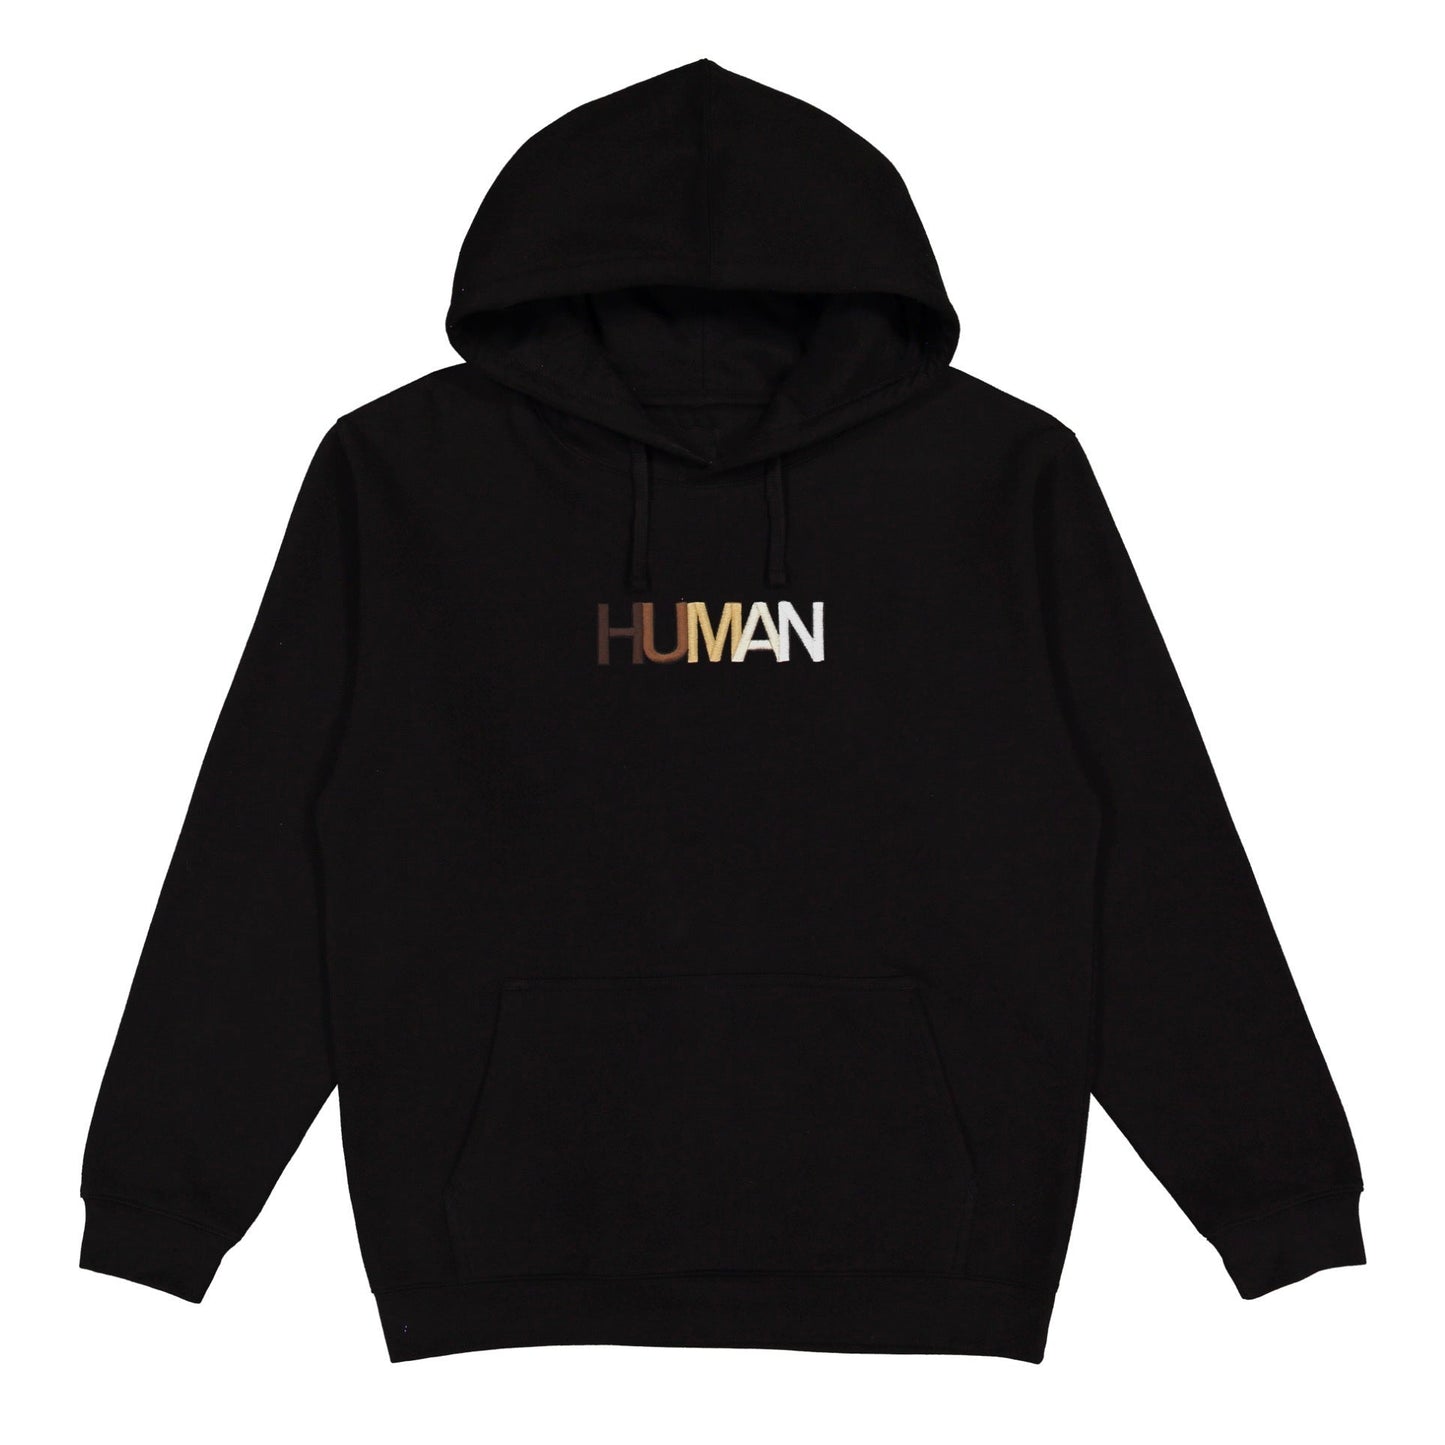 Human Embroidered Hoodie Wear The Peace Hoodies Black S